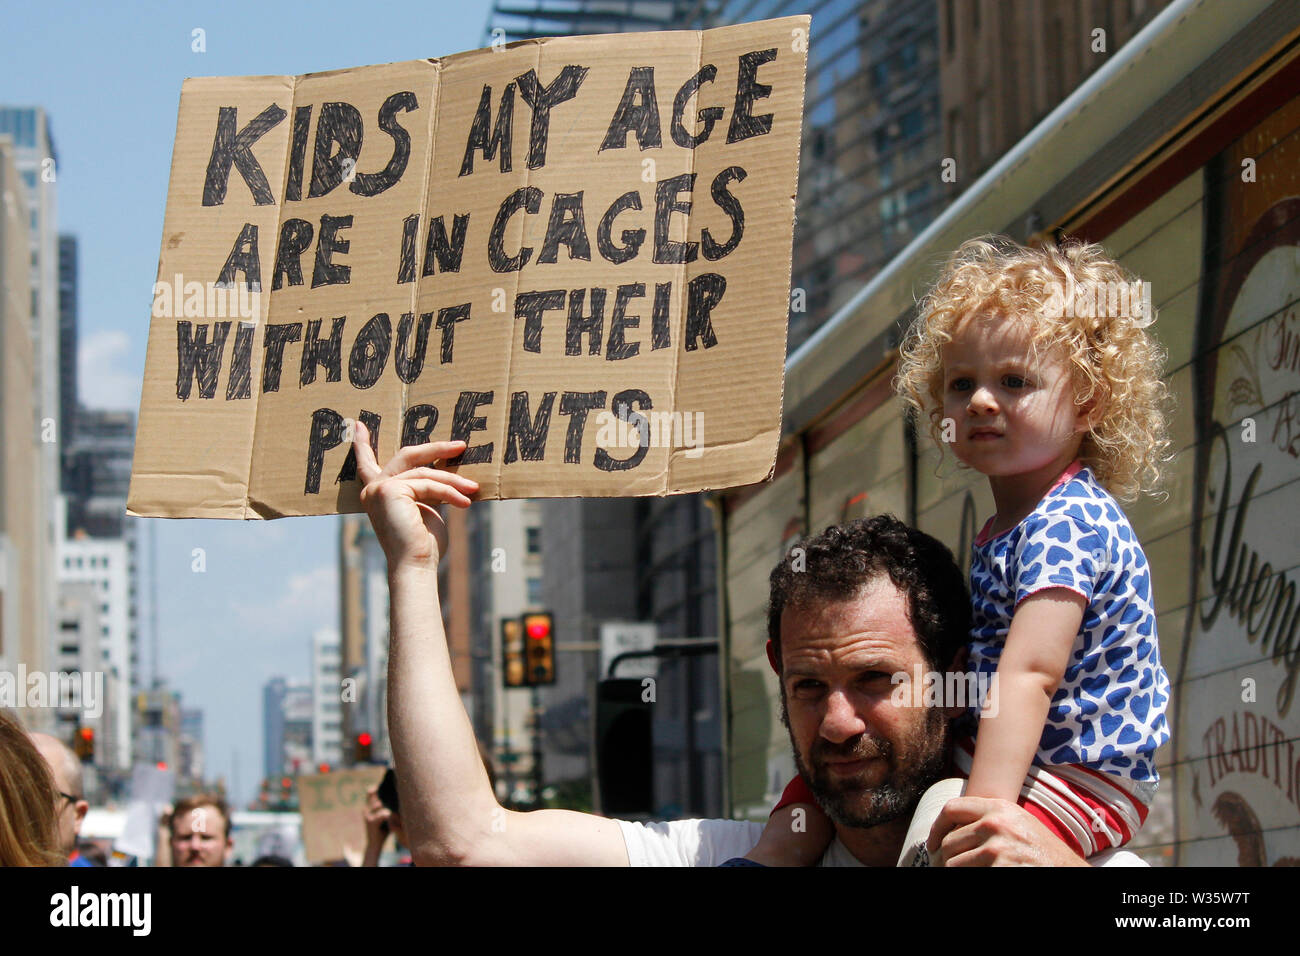 Philadelphia, PA, USA - July 12, 2019: A father and child hold a sign  to protest inhumane conditions for children in immigration detention camps. Stock Photo